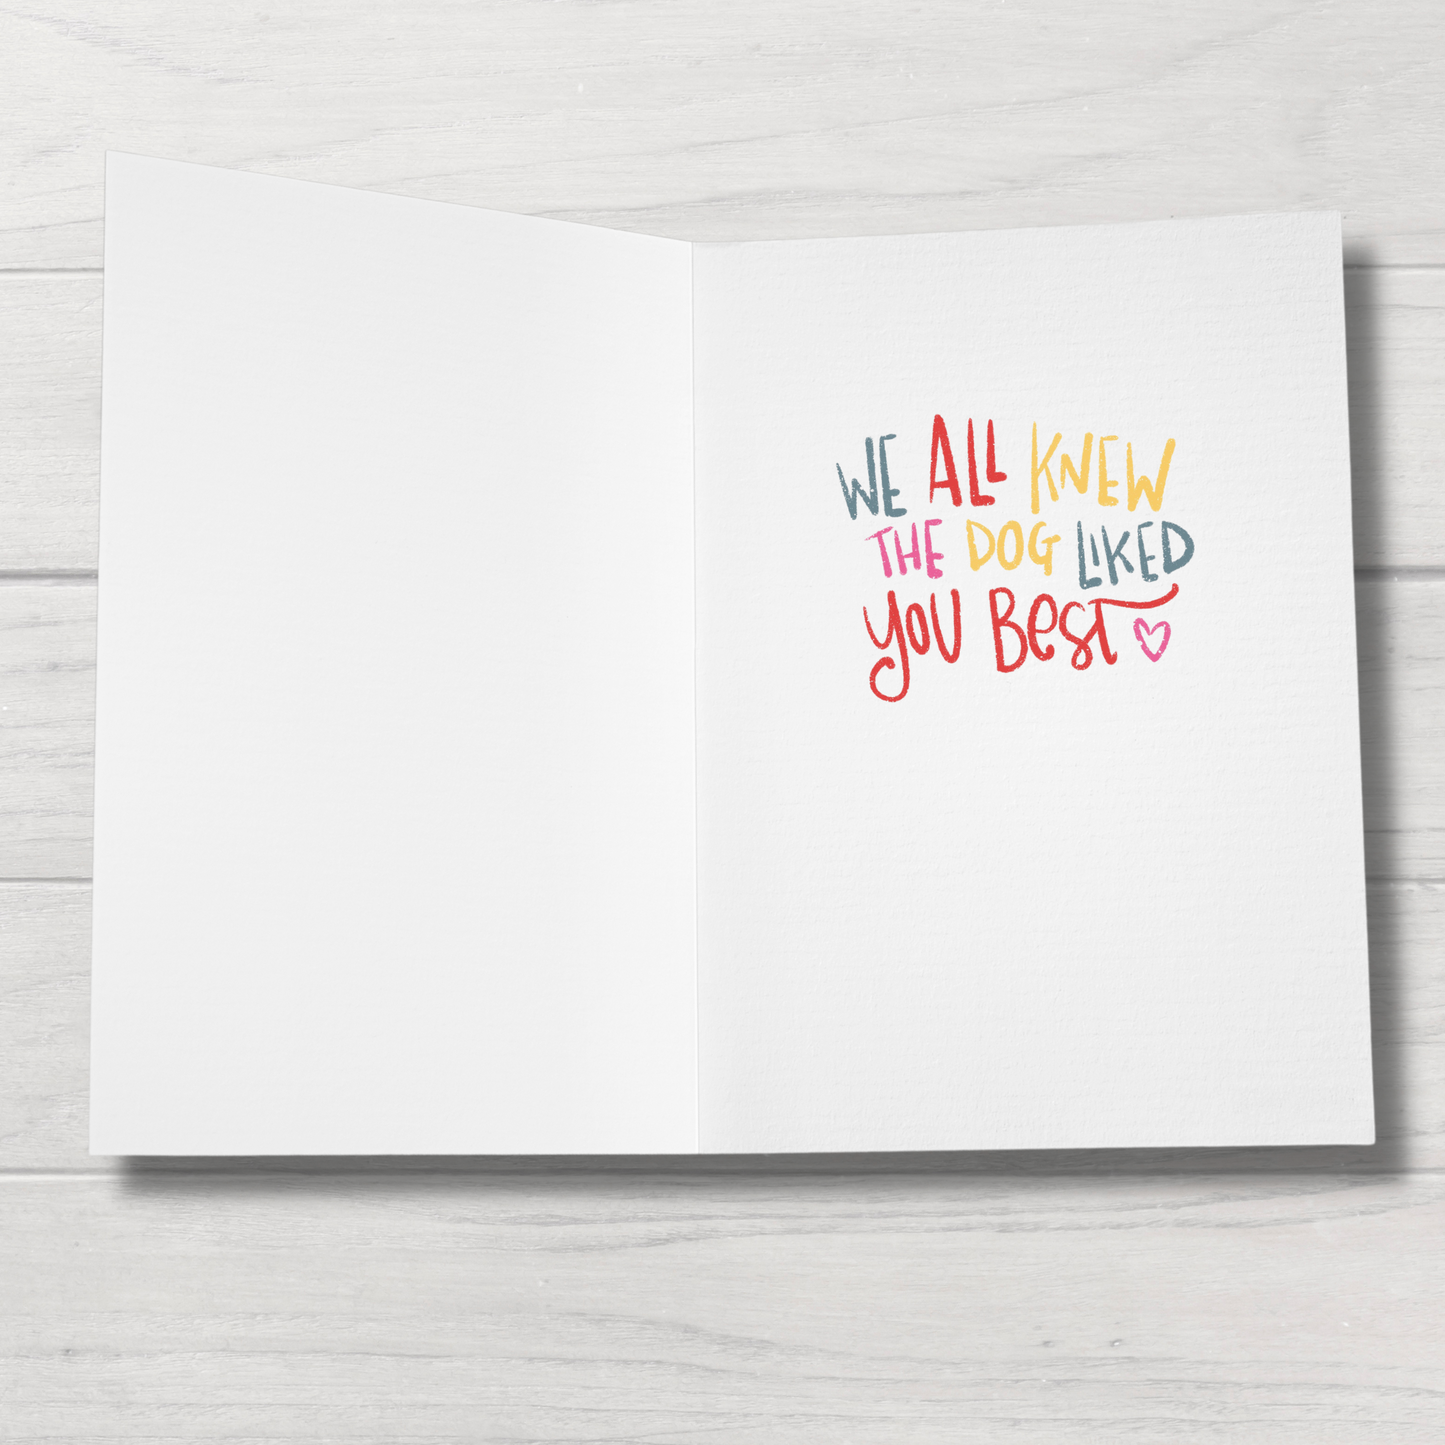 Divorce Greeting Card | Congrats on Your Divorce | Funny Divorce Card | Pet Parent Divorce Card